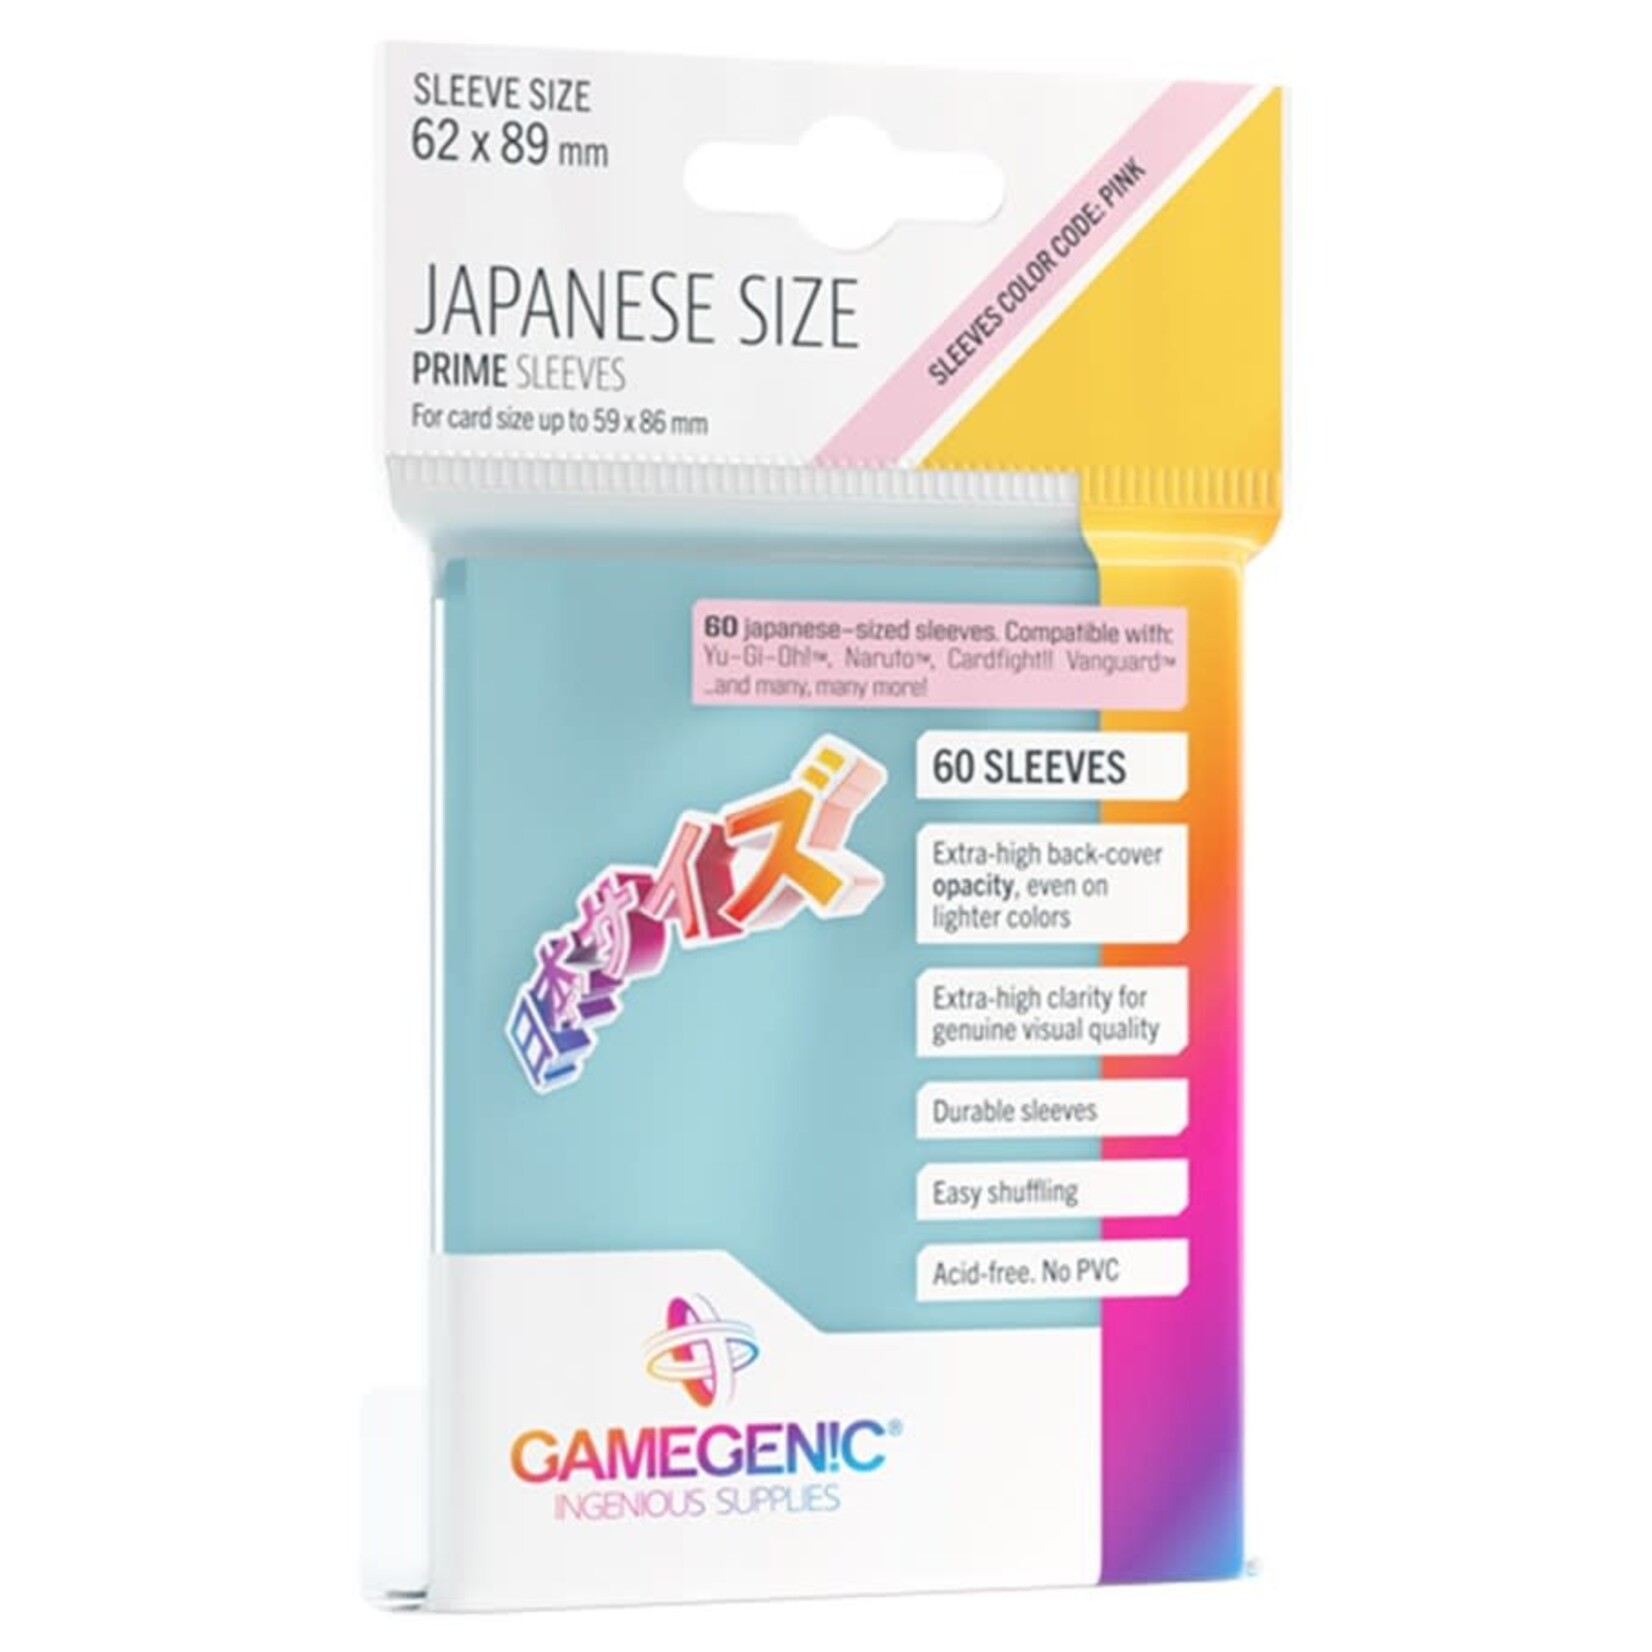 Gamegenic Gamegenic Clear Japanese Size Prime Sleeves (60) 62x89mm